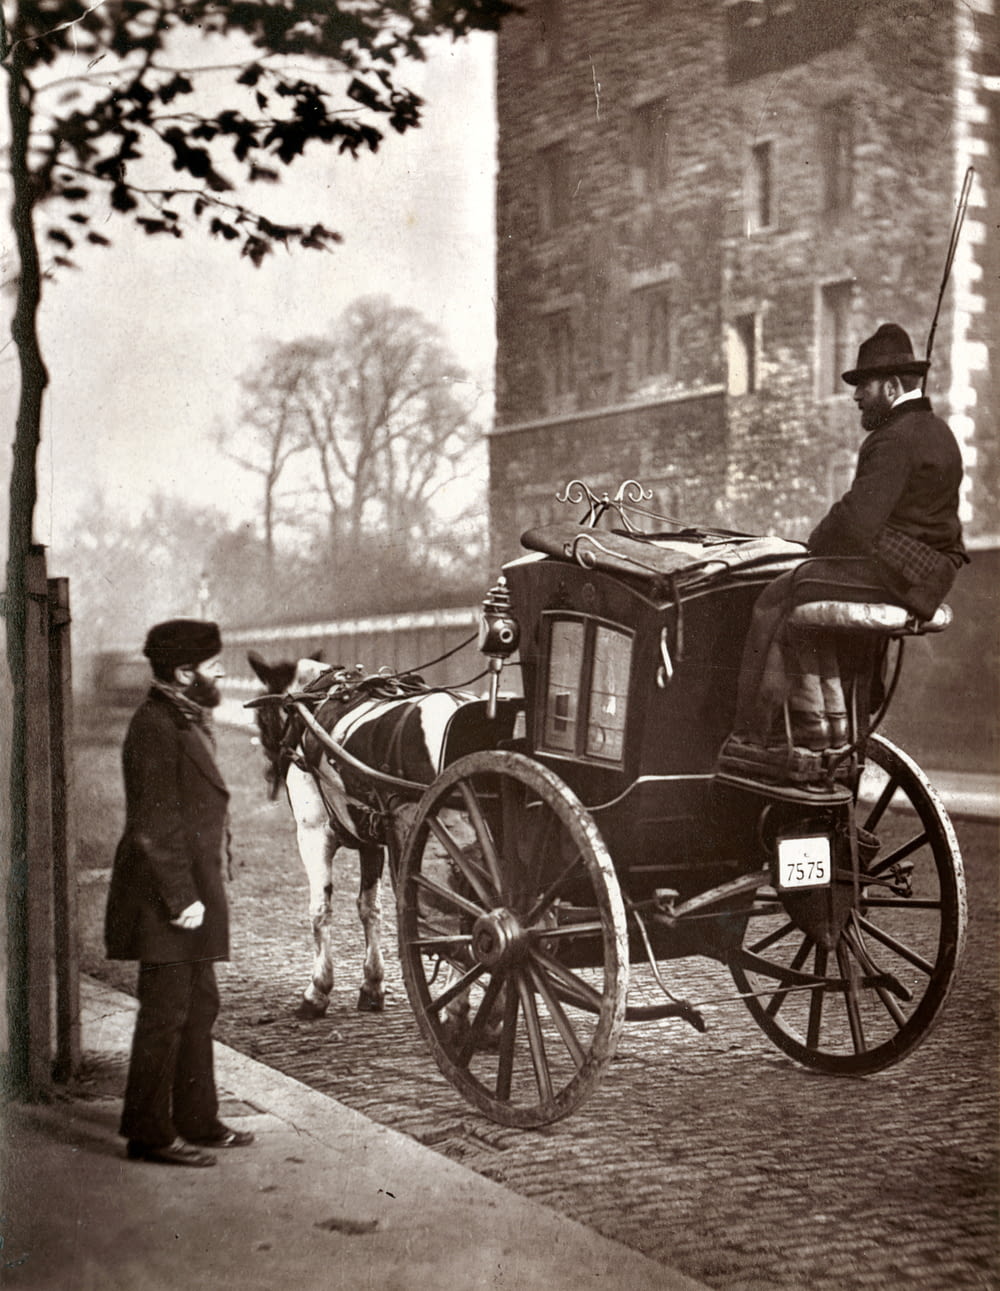 man in black coat standing beside horse carriage in grayscale photography